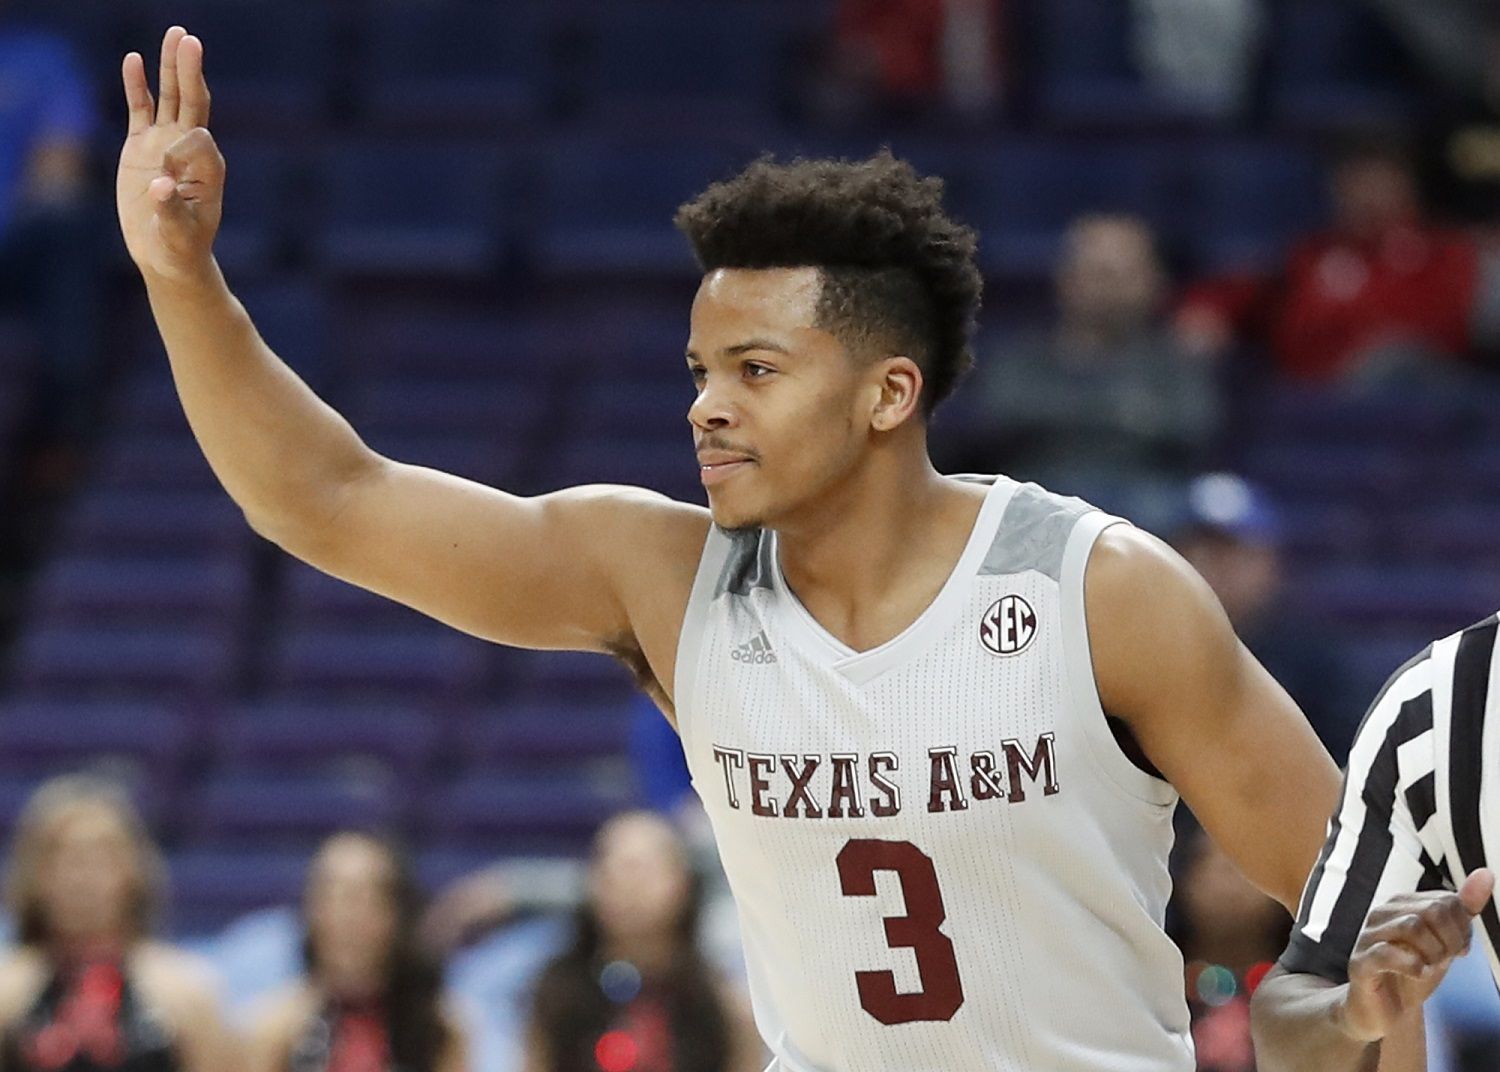 Texas A&amp;M's Admon Gilder gestures after making a 3-point basket during the first half in an NCAA college basketball game at the Southeastern Conference tournament Thursday, March 8, 2018, in St. Louis. (AP Photo/Jeff Roberson)